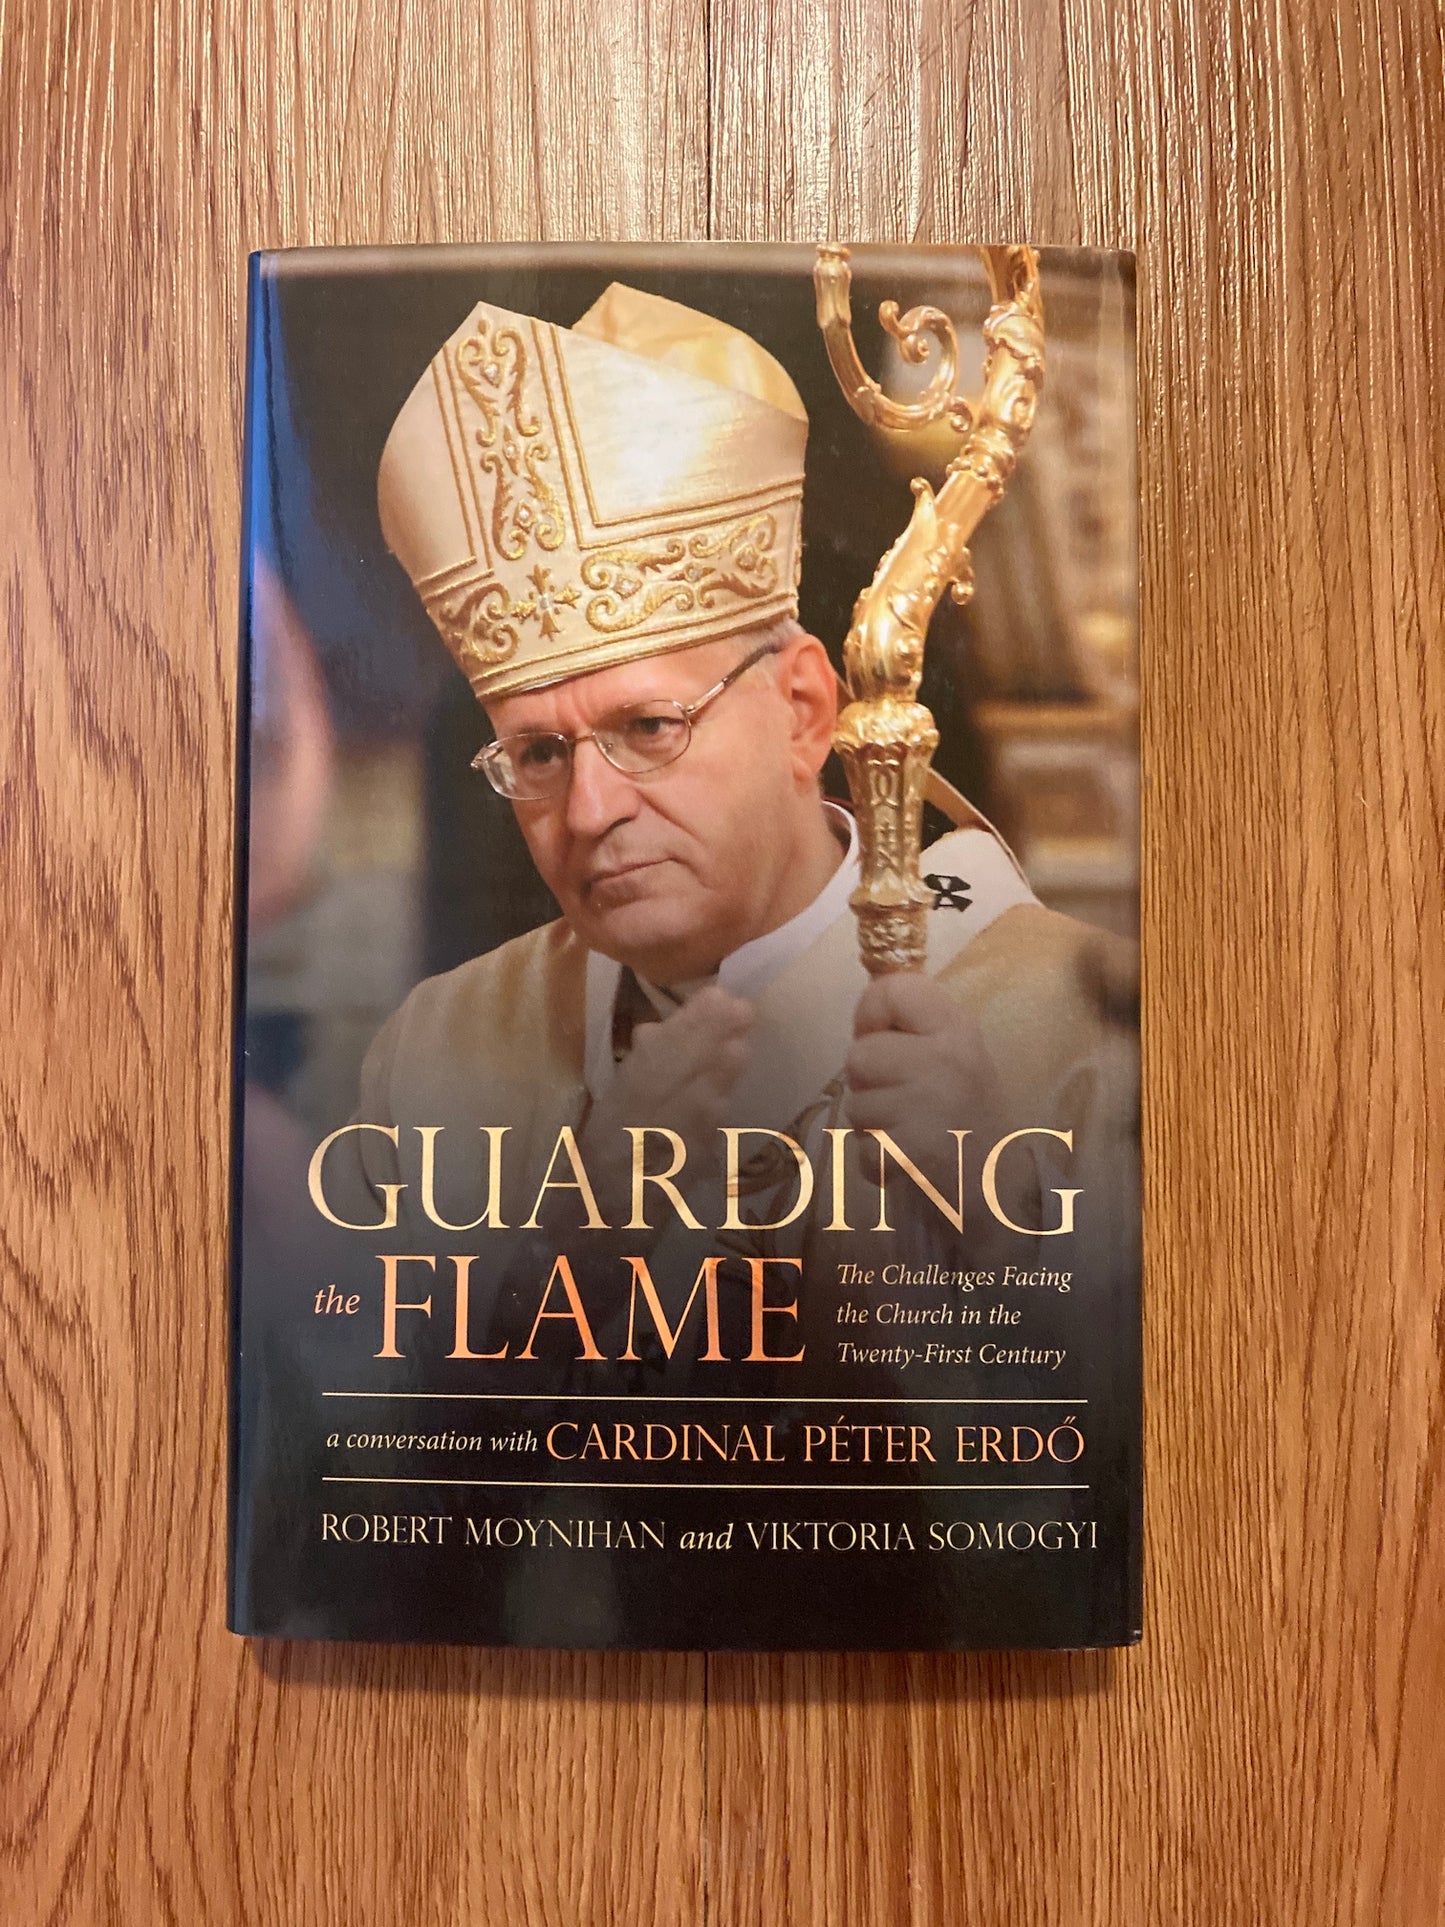 Guarding the Flame: The Challenges Facing the Church